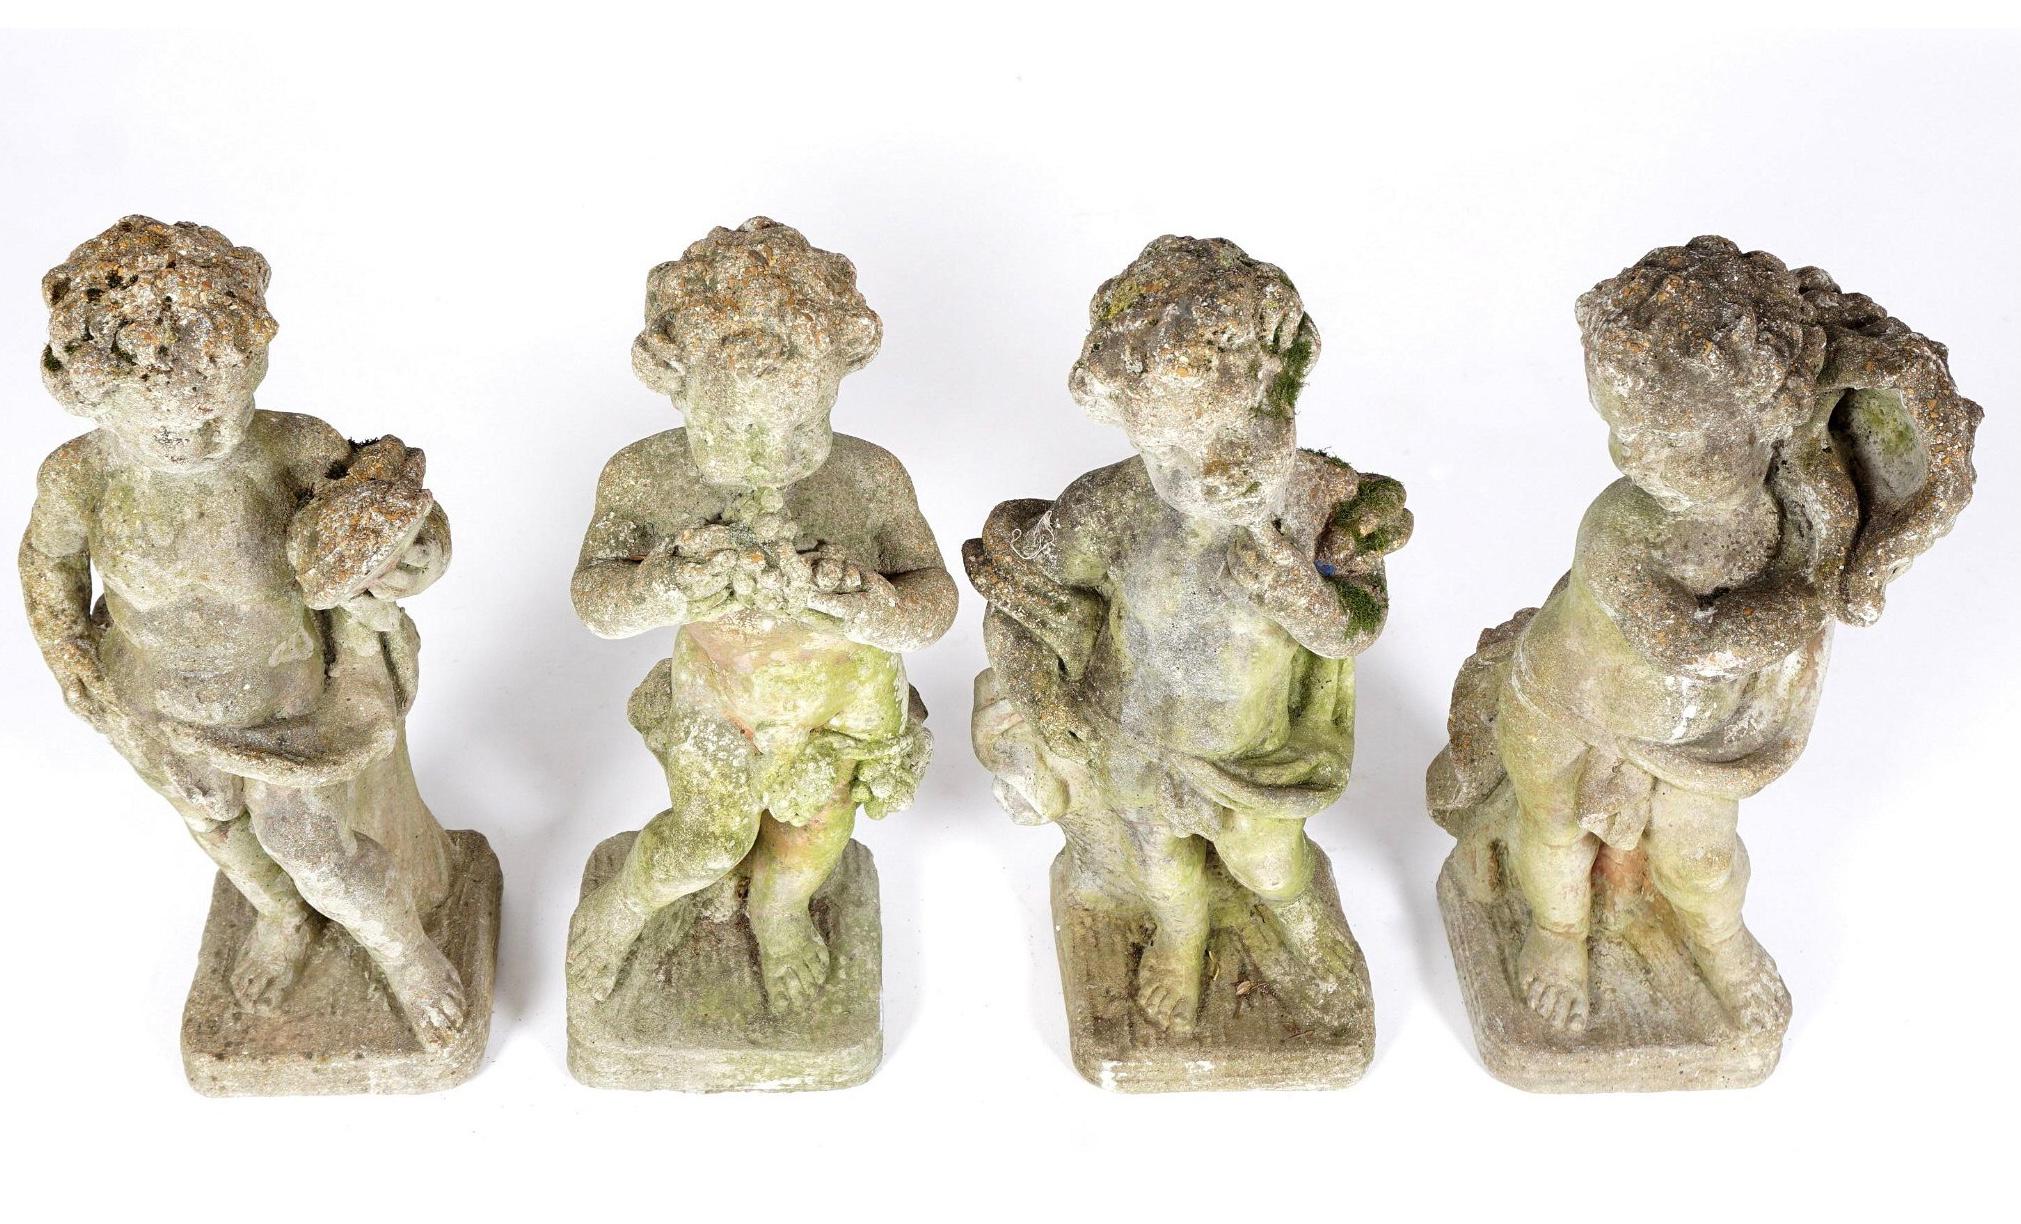 A charming set of 4 life-size garden statues in cast stone, early 20th century, depicting putti in various poses, possibly the four seasons. Nice patina with traces of lichen and moss.